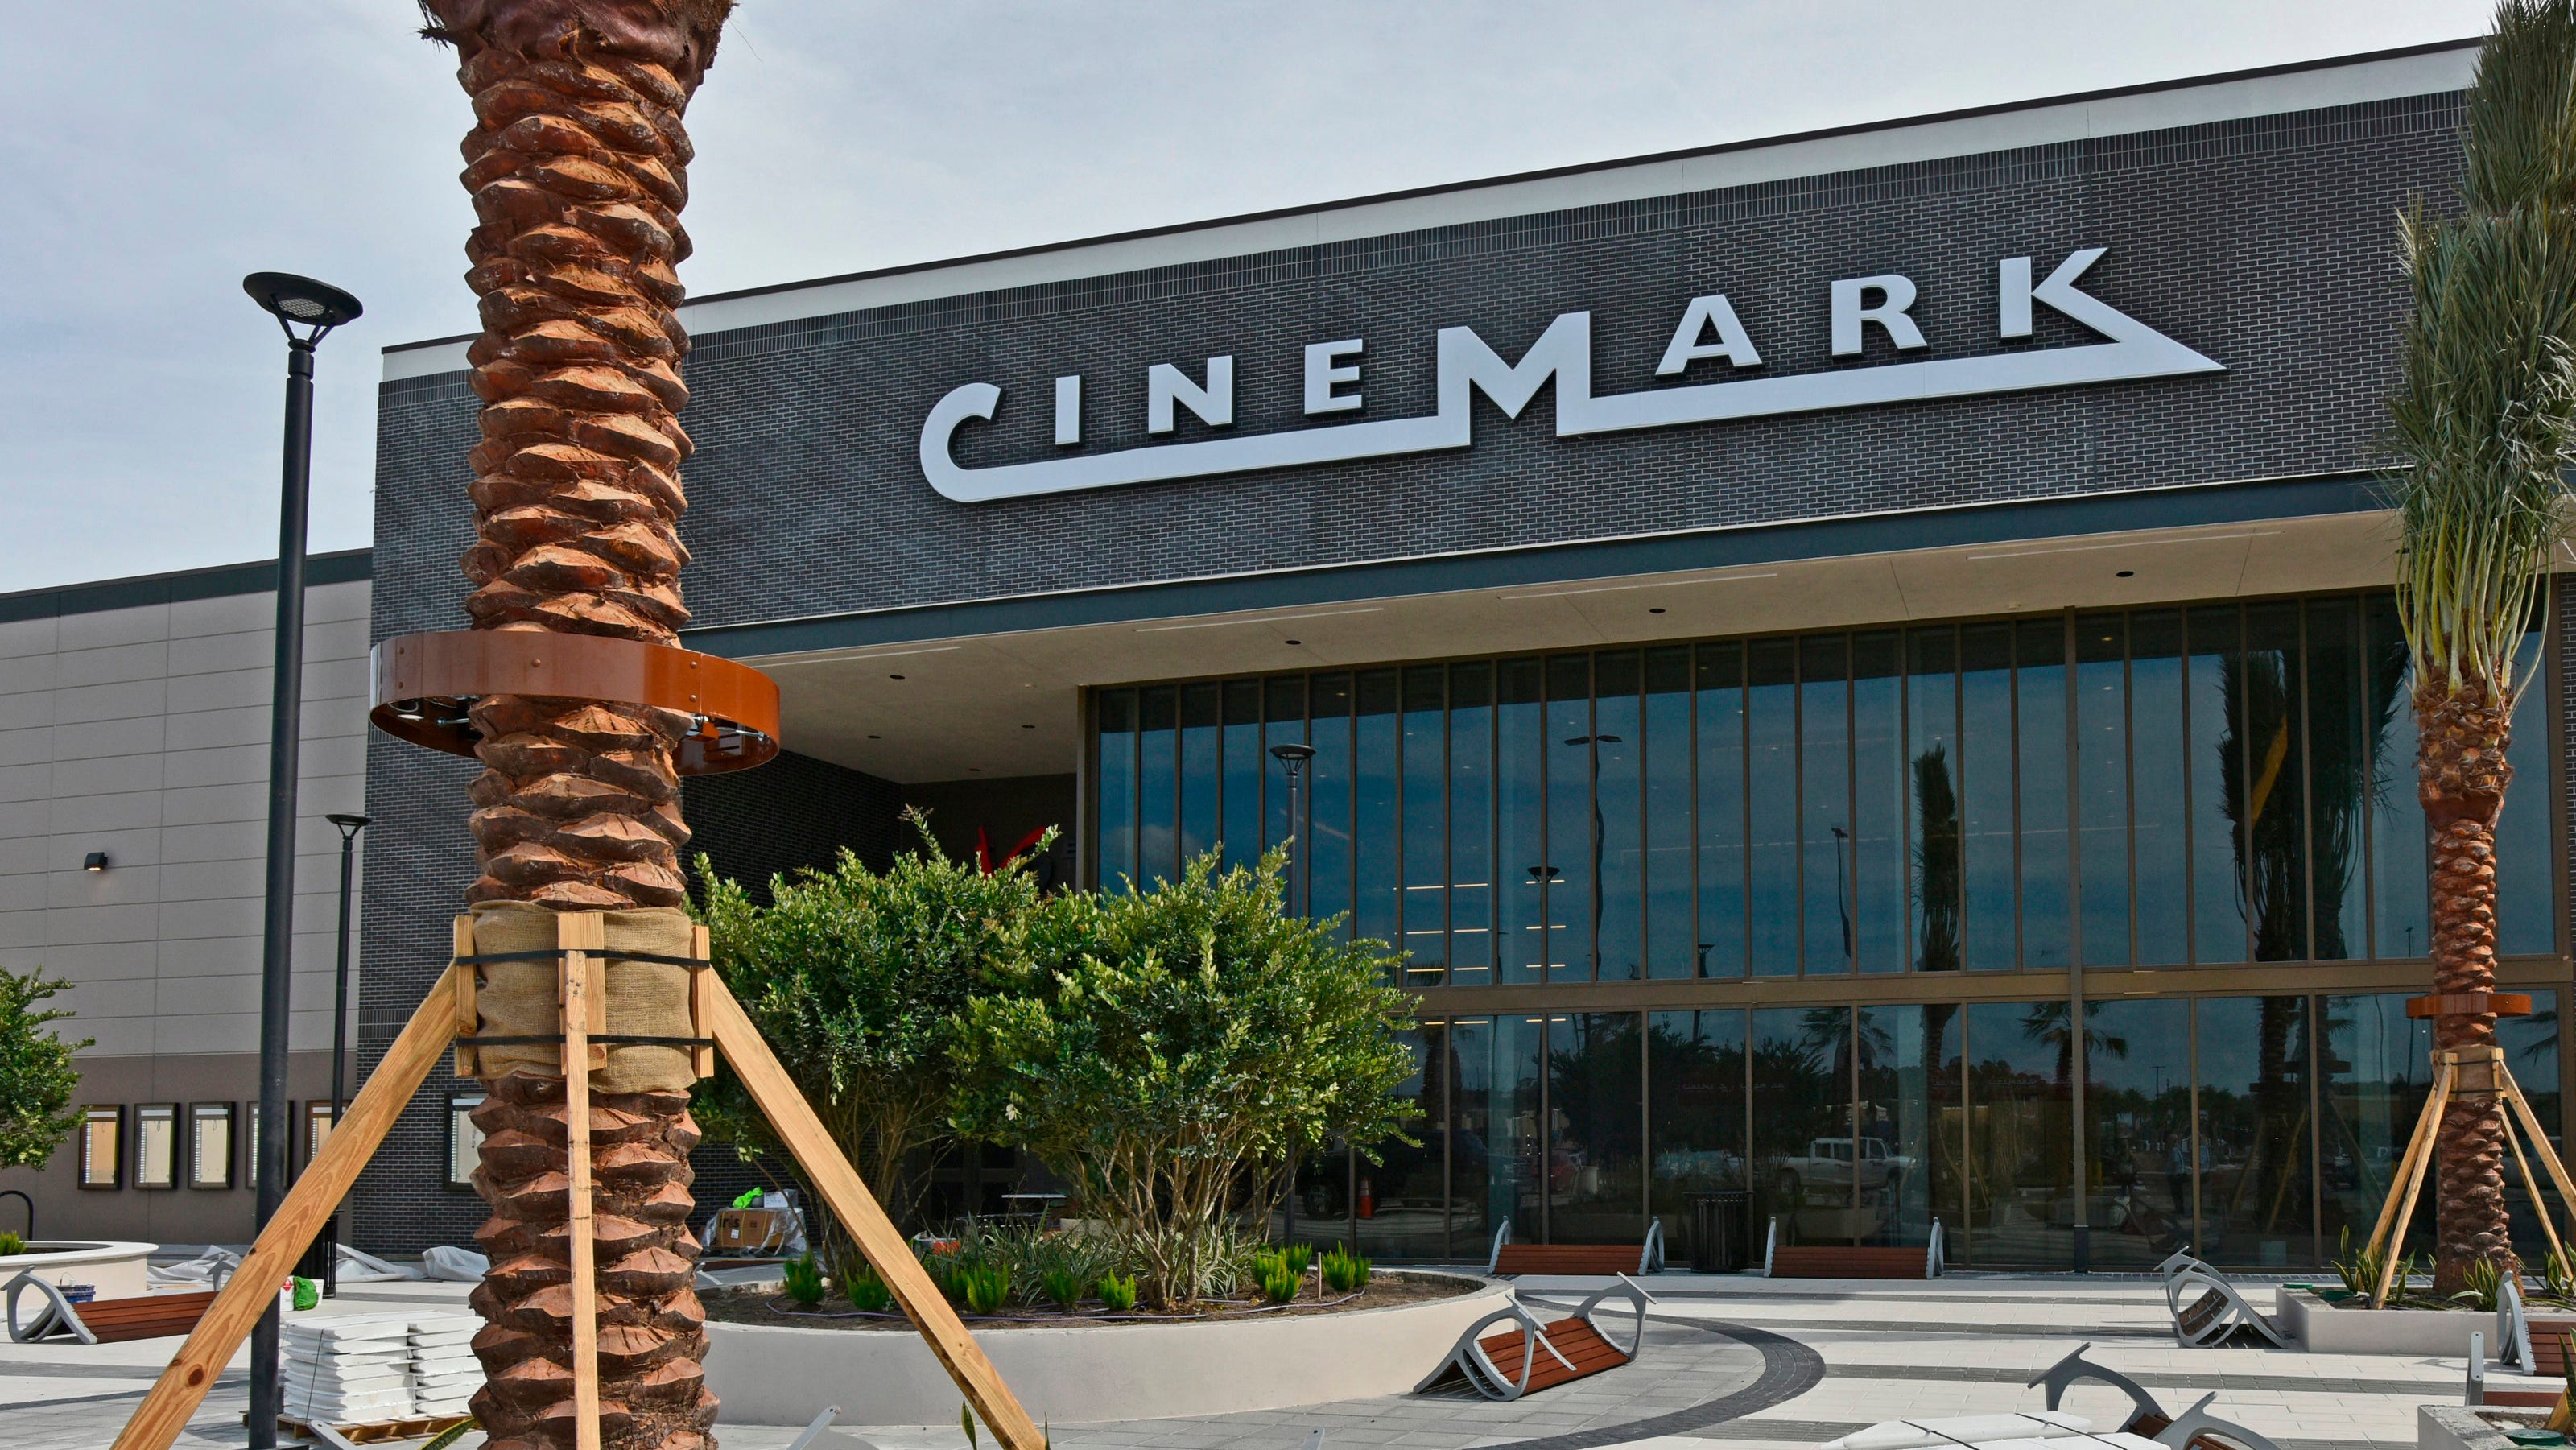 Movie fans can head back to Cinemark Durbin Park and XD on Friday